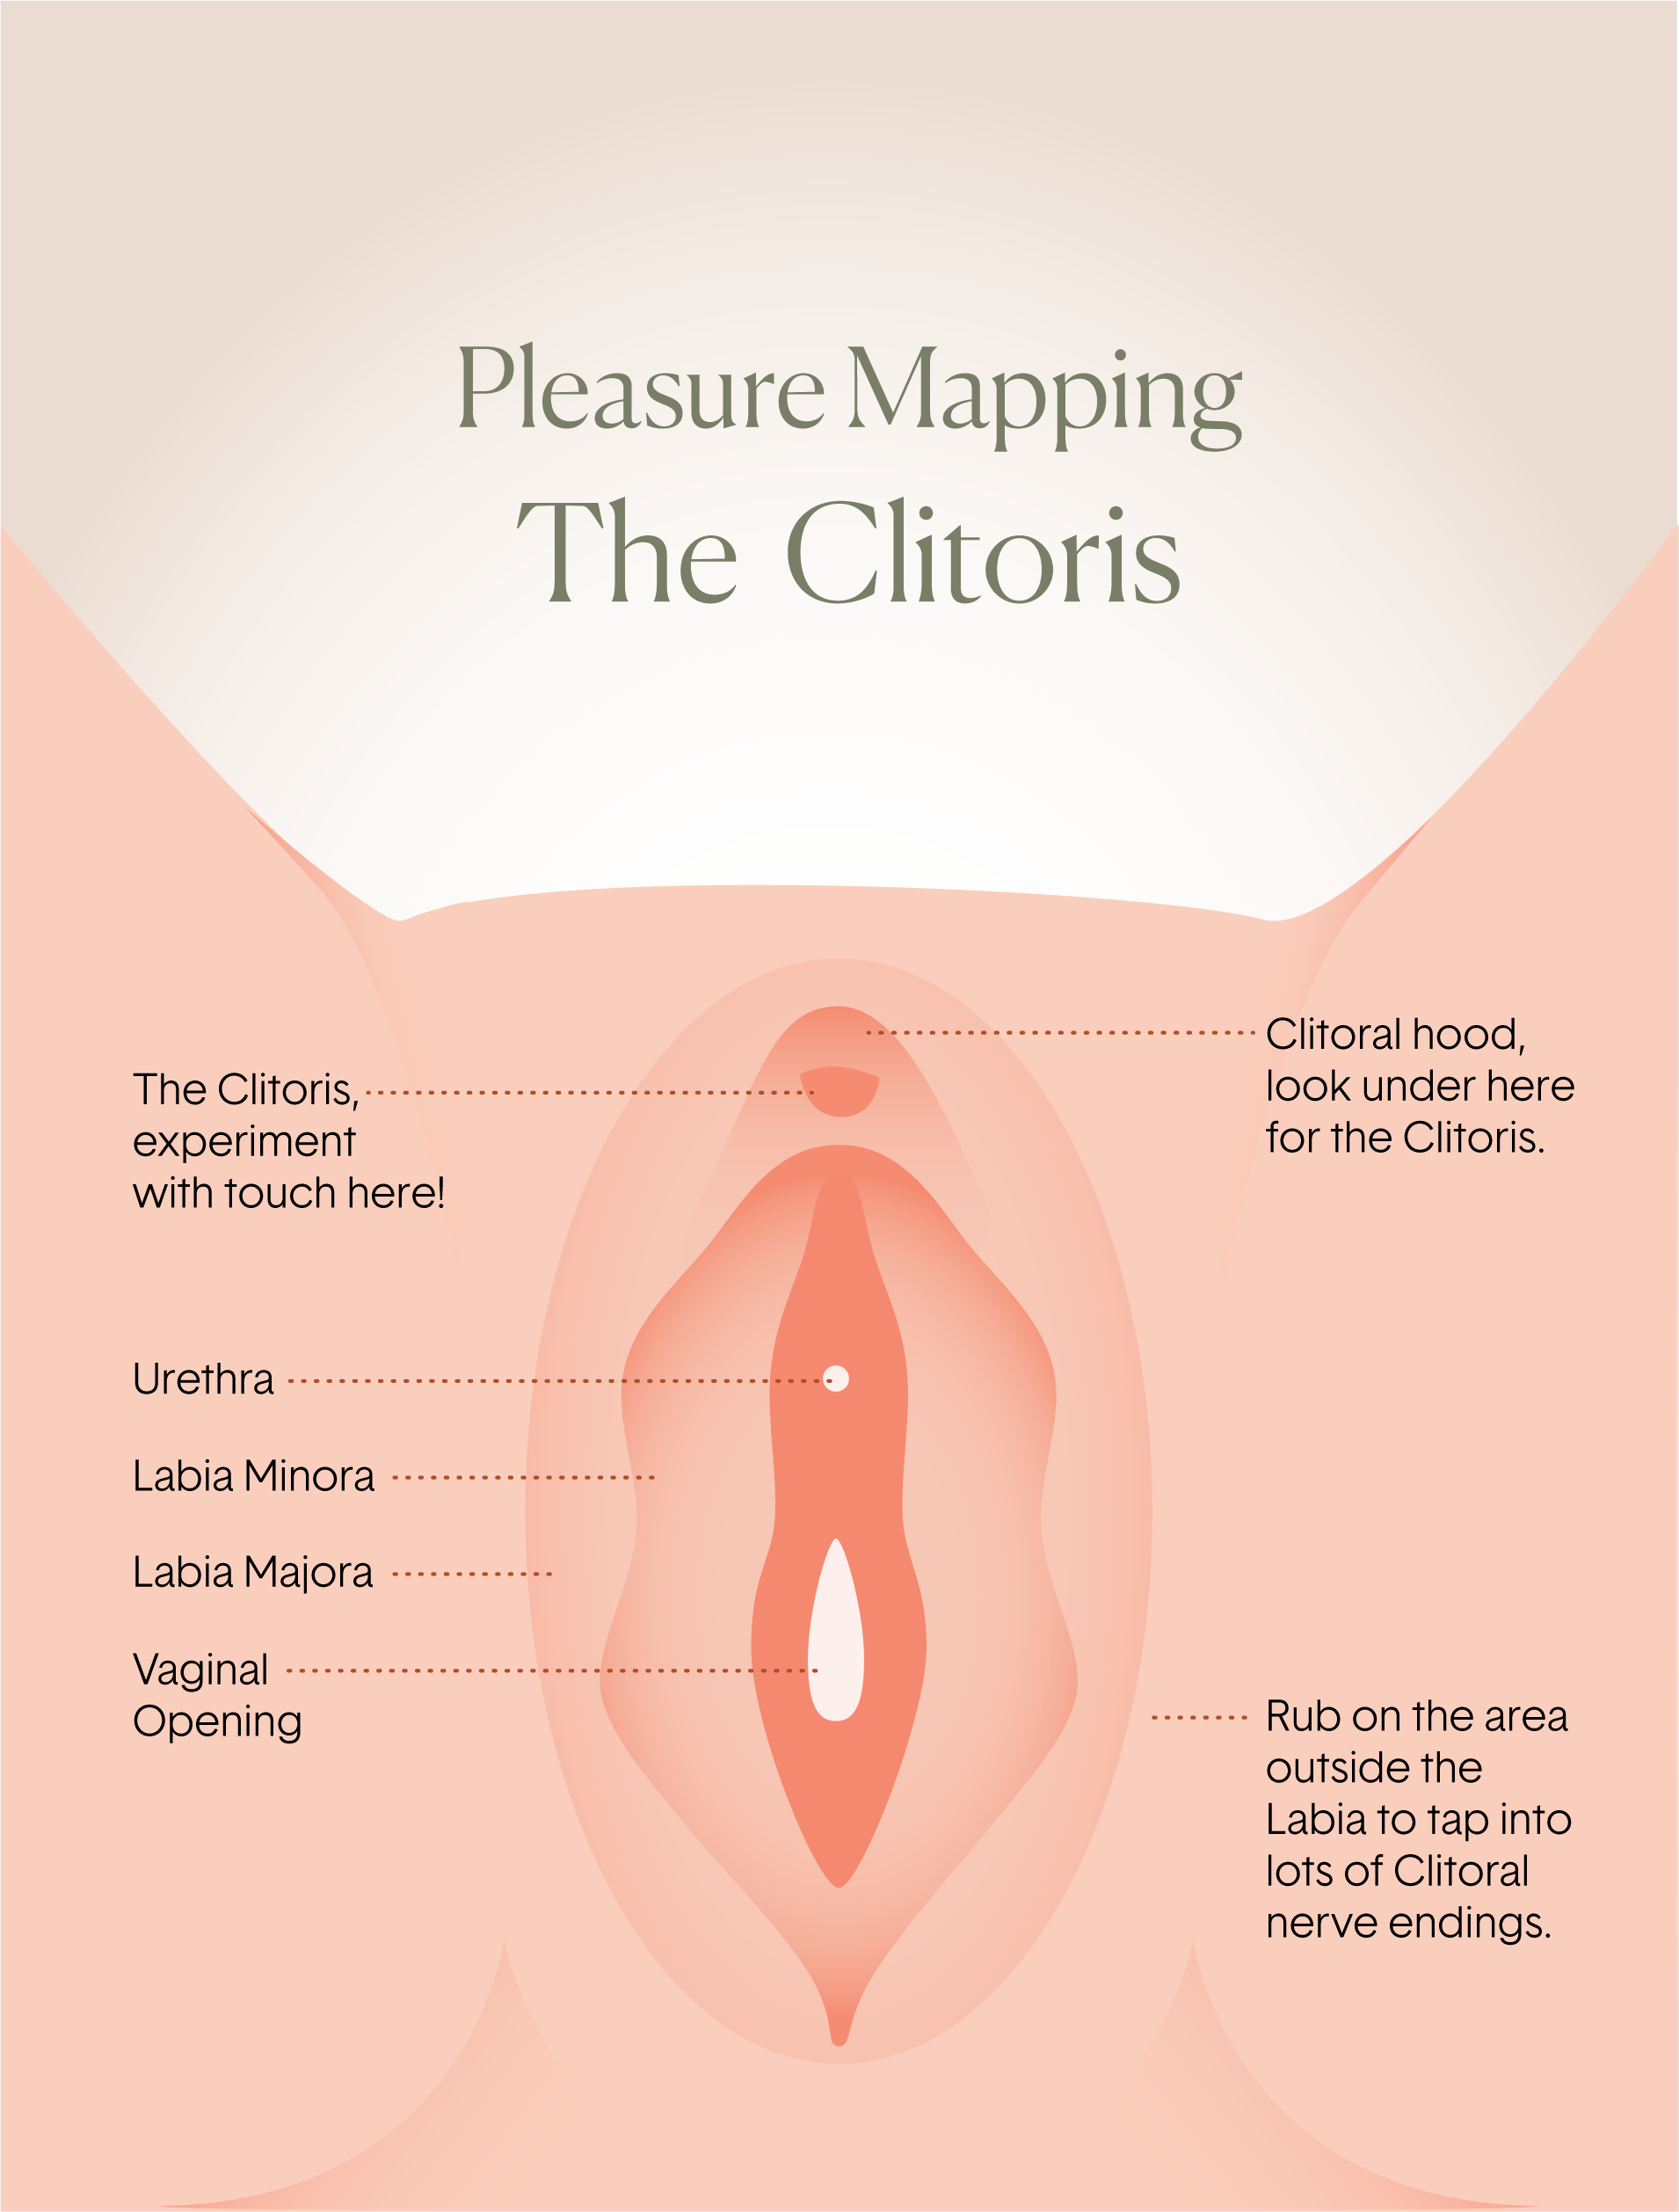 Where is the Clitoris?